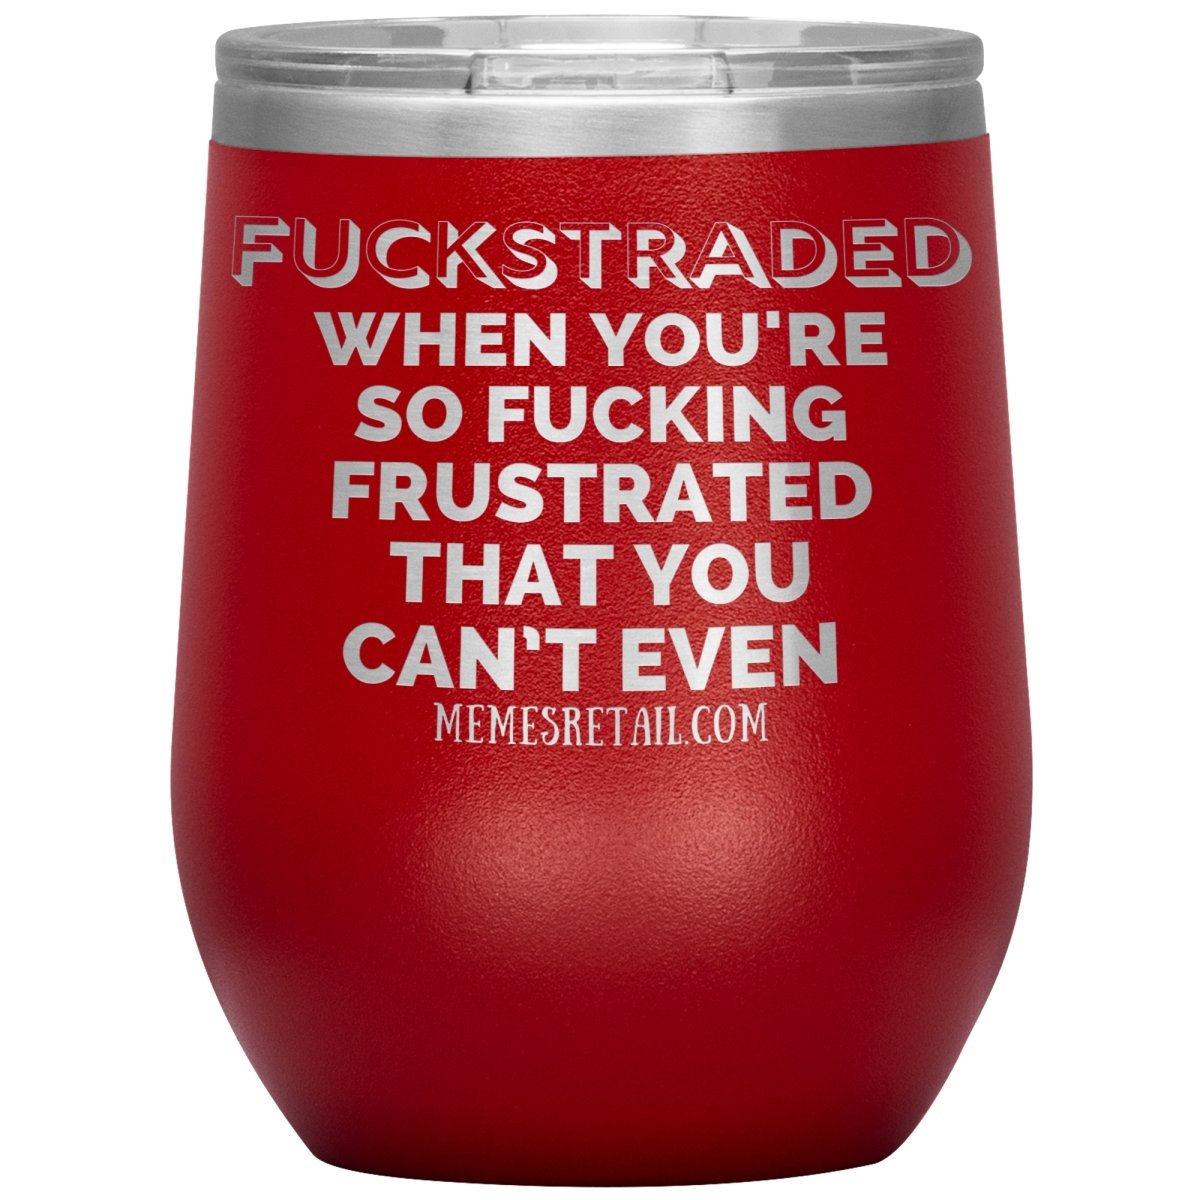 Fuckstraded, When You're So Fucking Frustrated That You Can’t Even Tumblers, 12oz Wine Insulated Tumbler / Red - MemesRetail.com